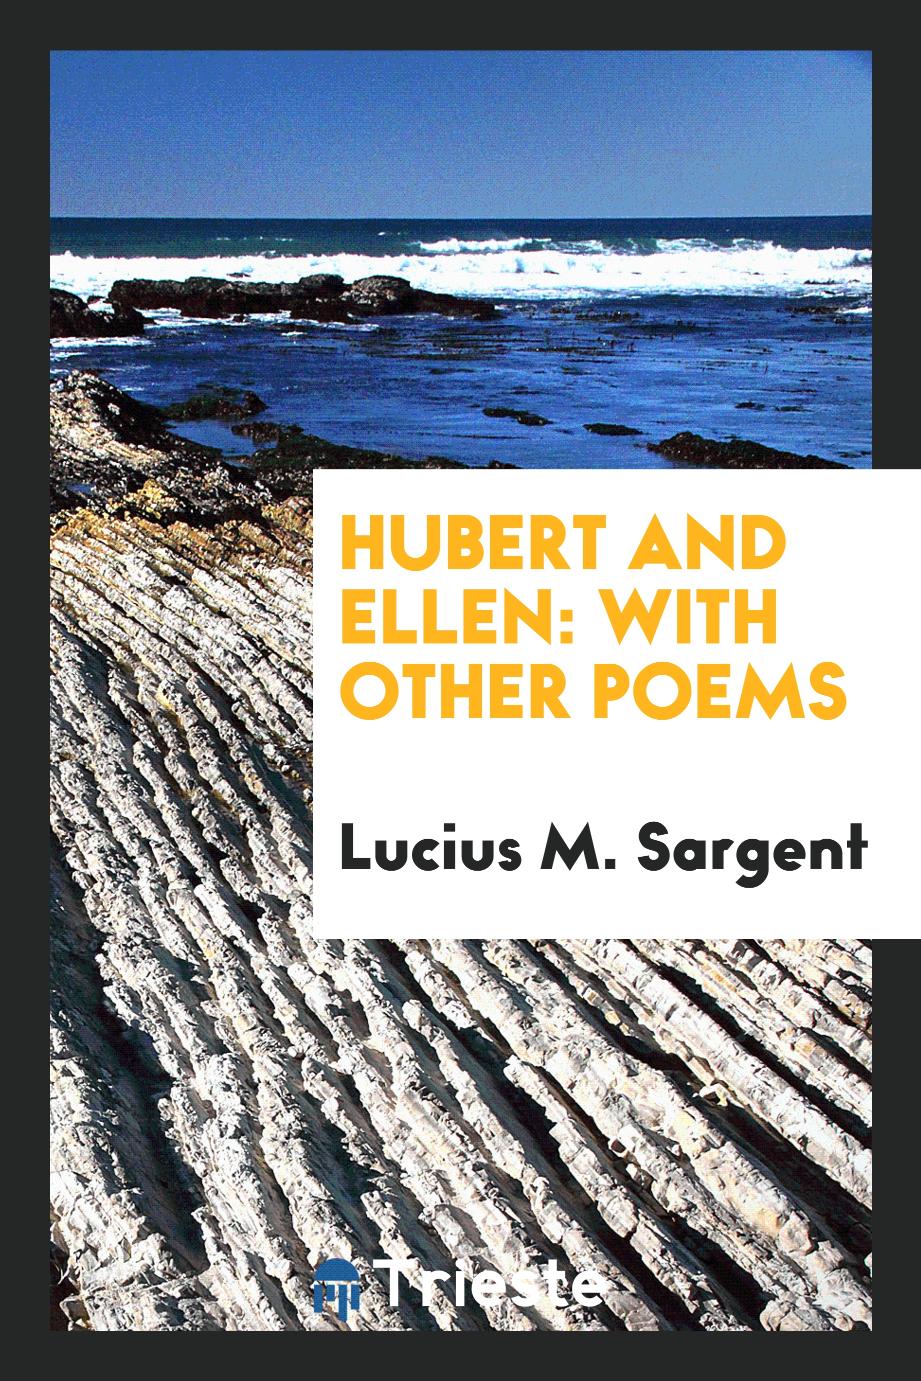 Hubert and Ellen: With Other Poems